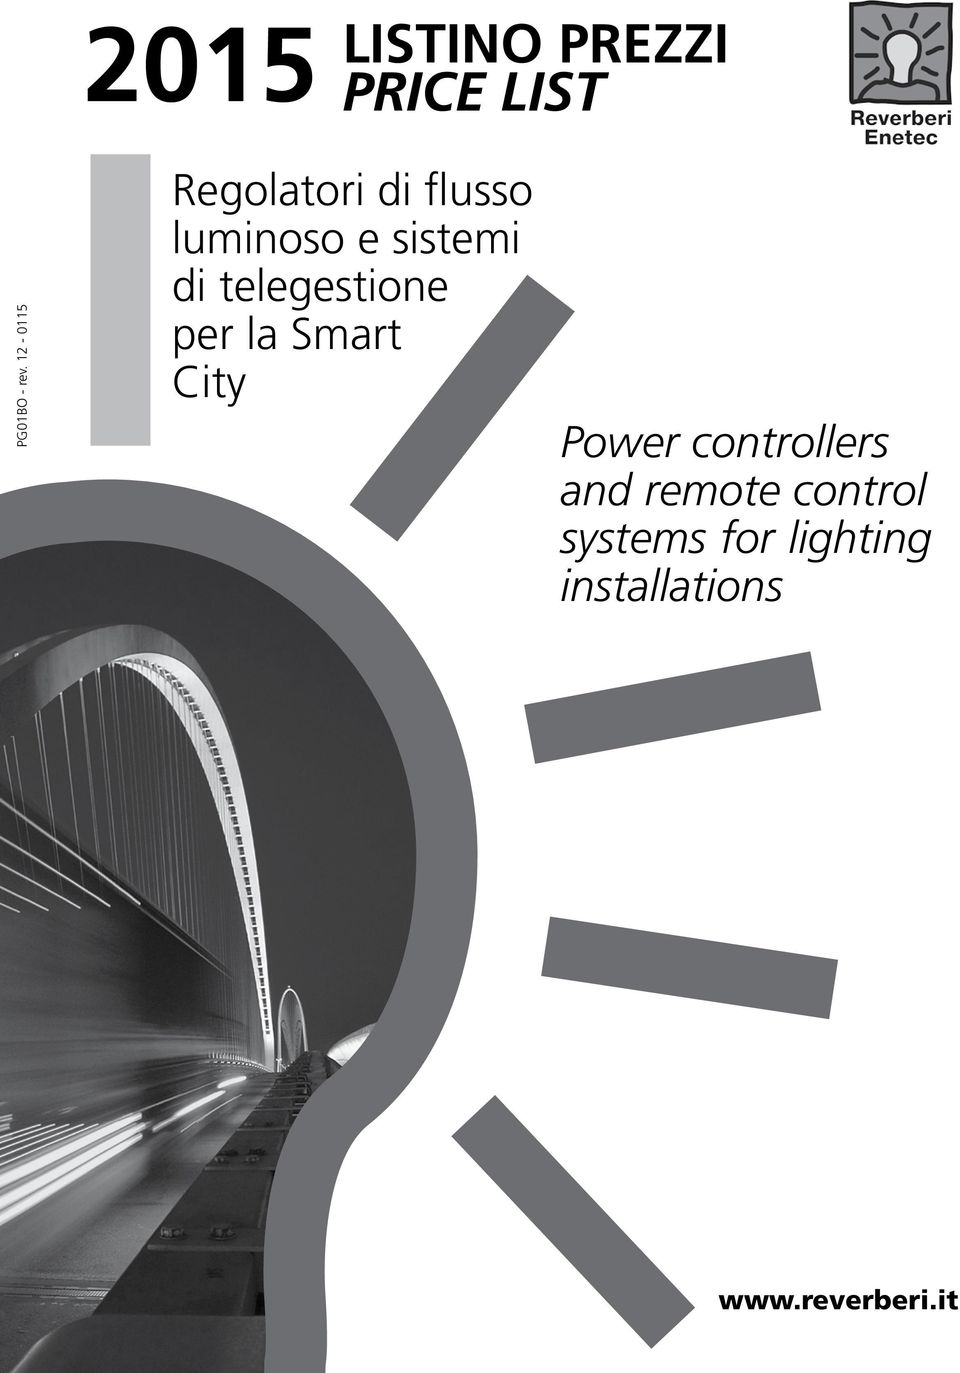 telegestione per la Smart City Power controllers and